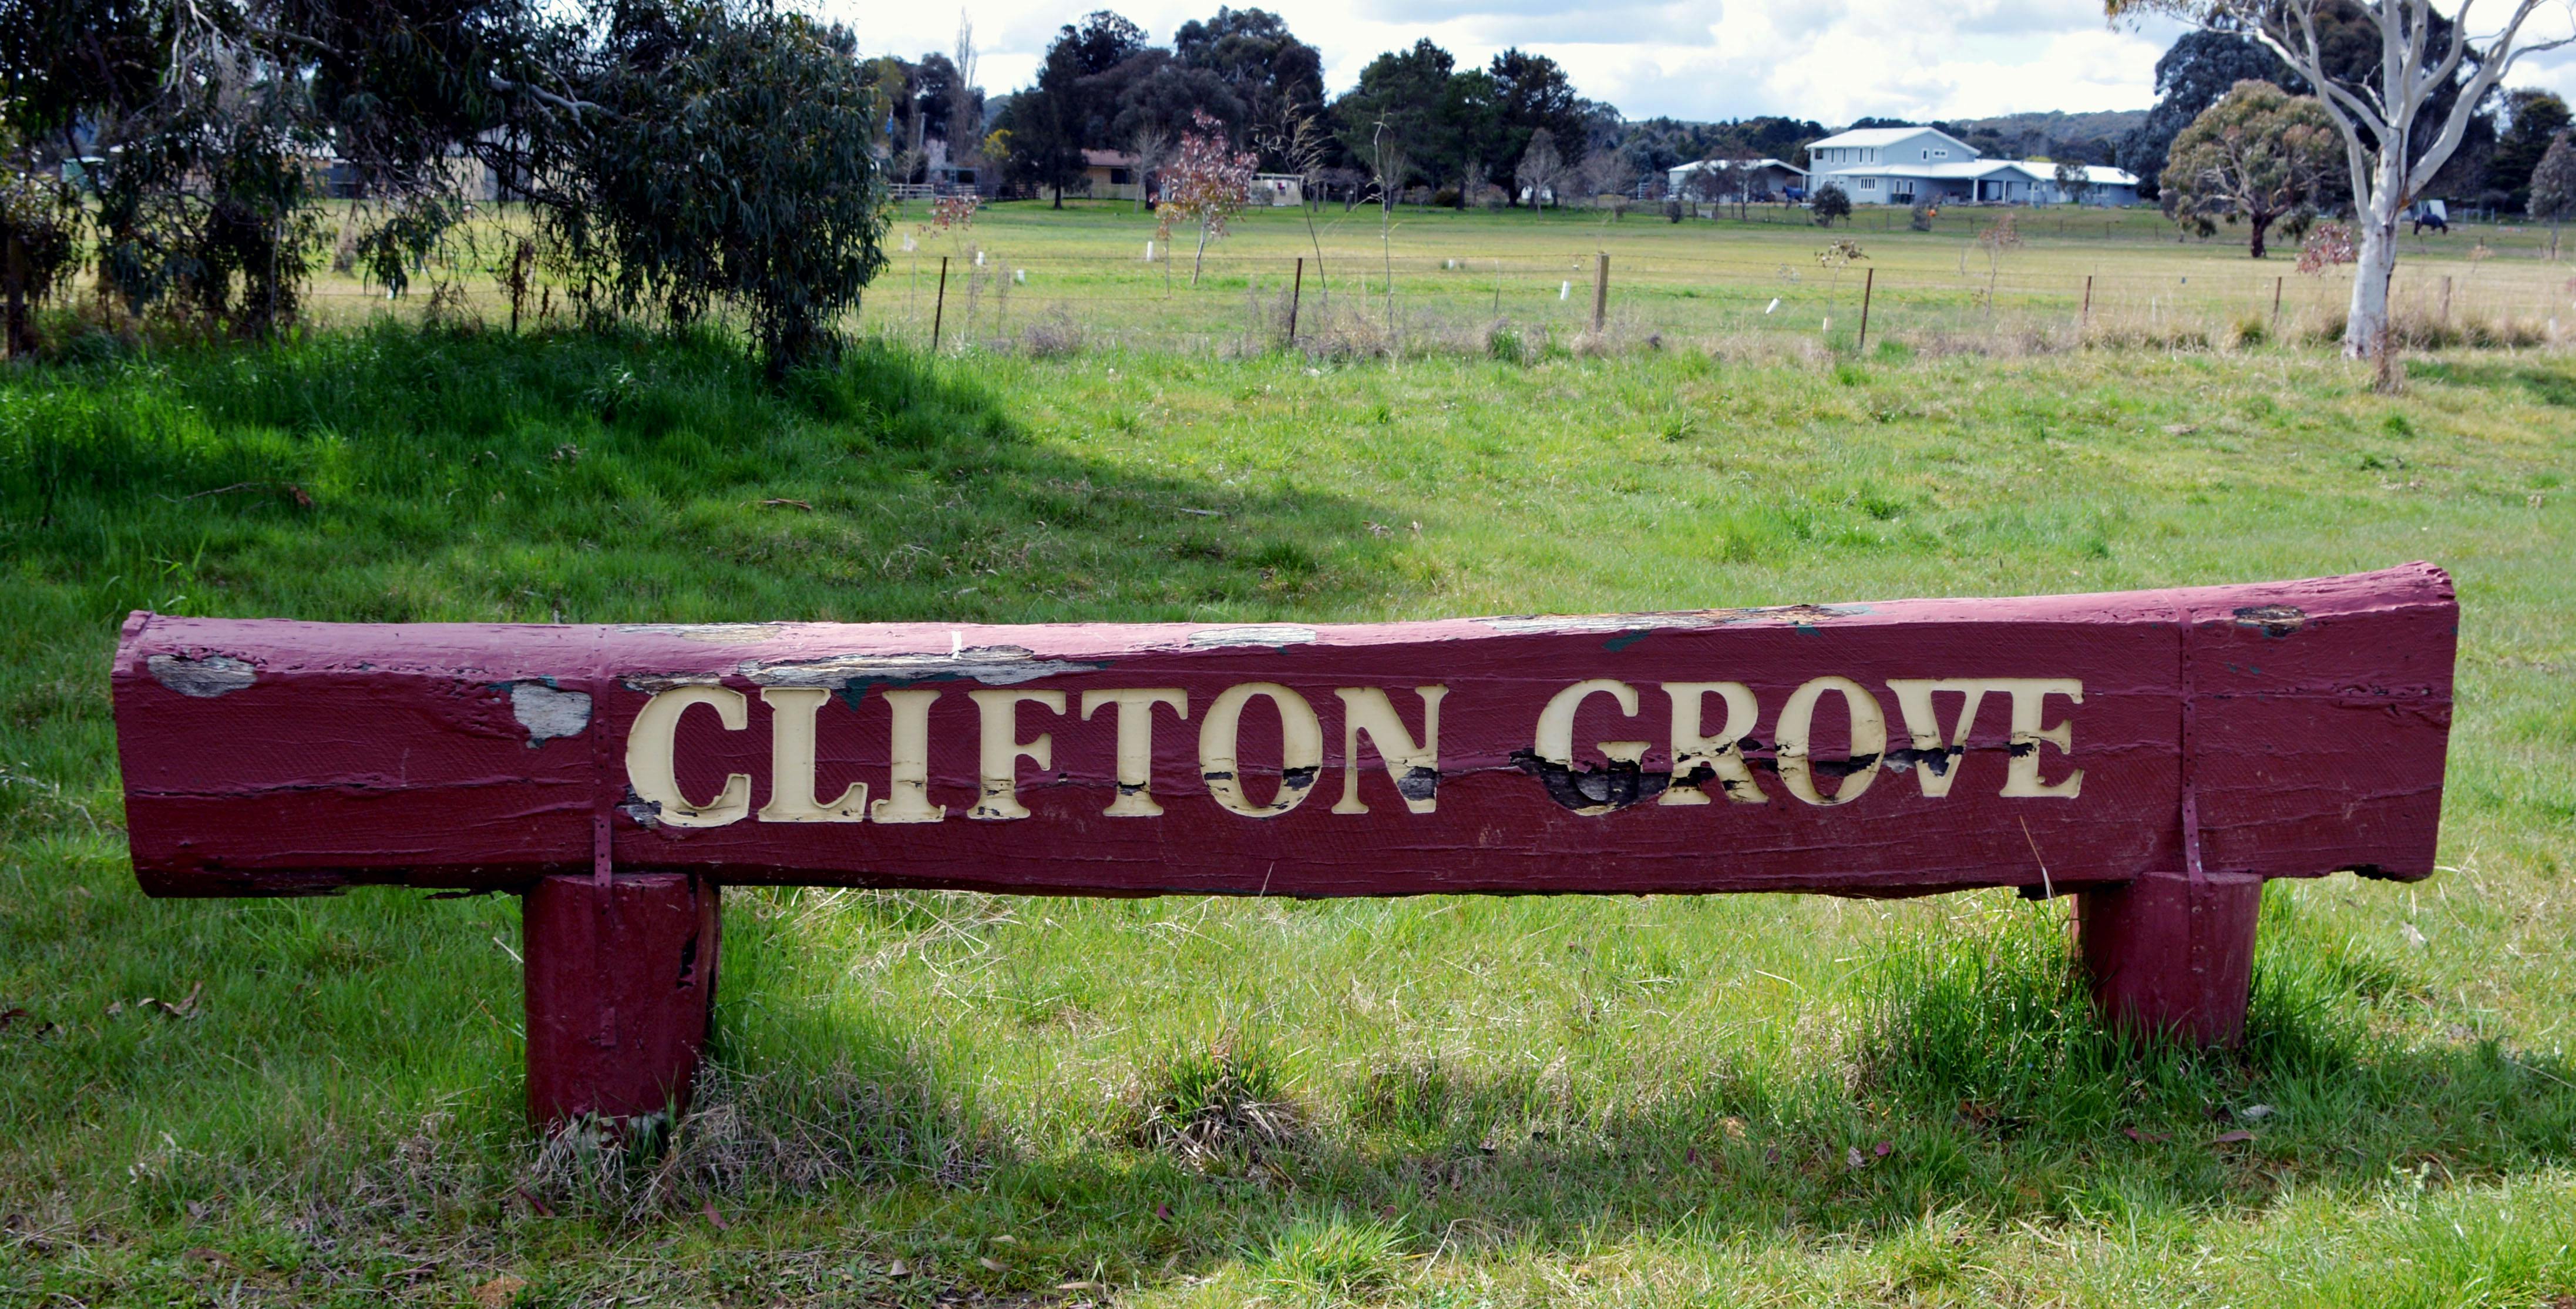 Clifton Grove entrance sign. The Masterplan floats a number of ways to improve the area around the sign, including a pull-in parking area for visitors.